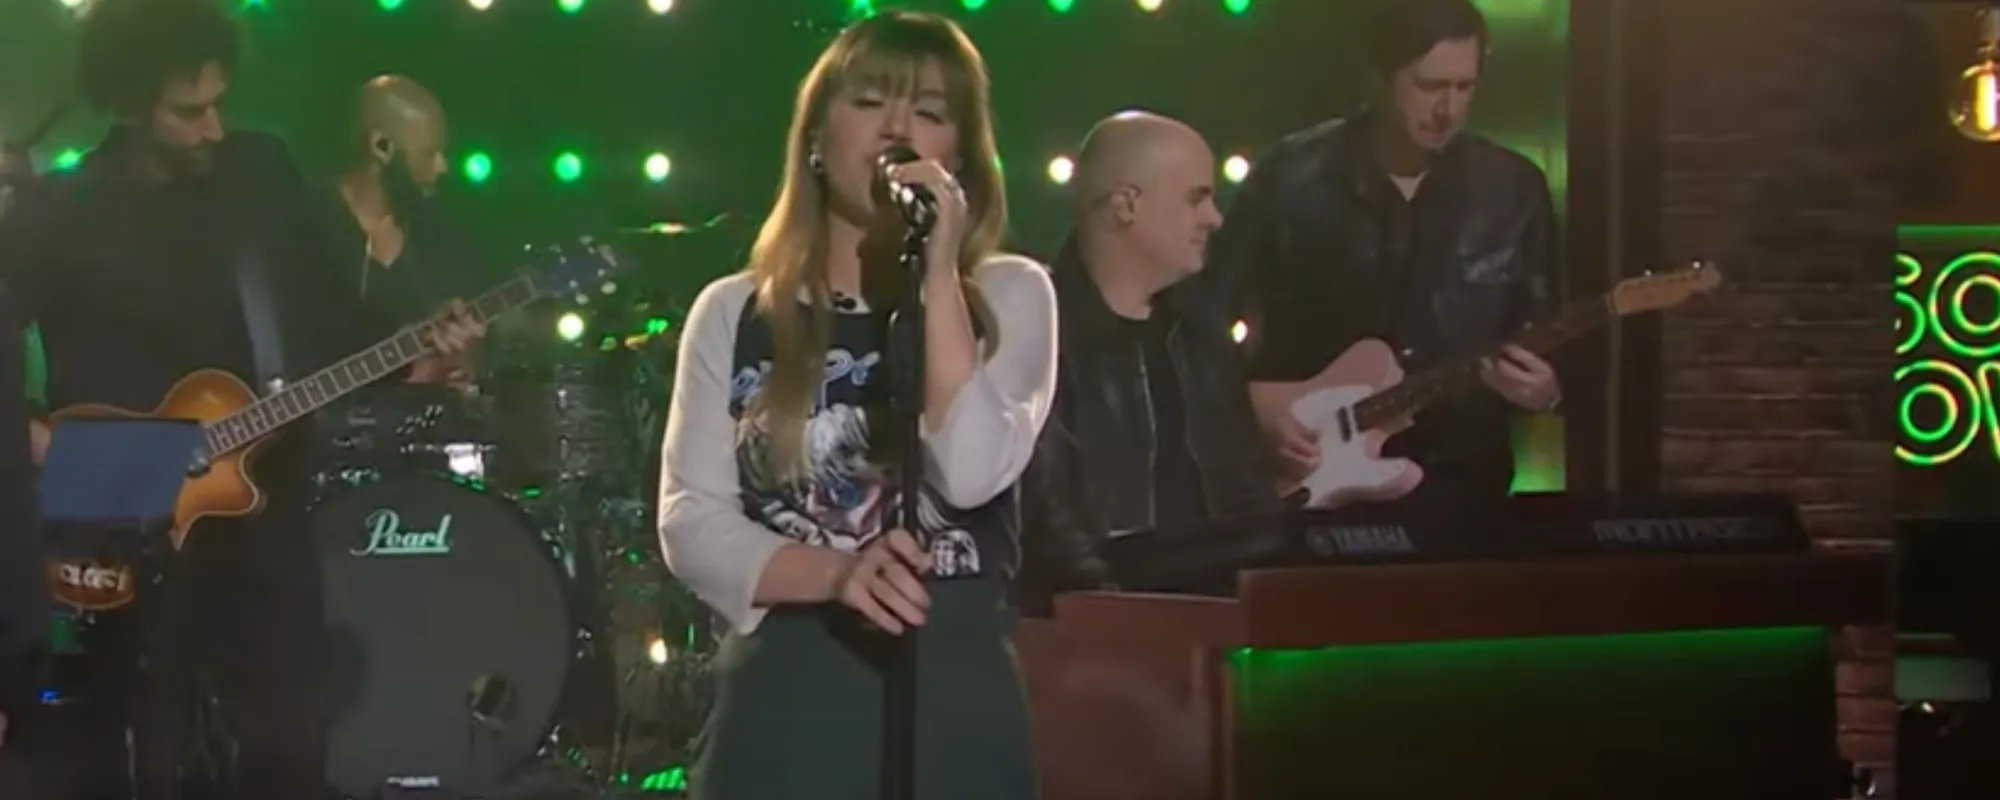 Watch Kelly Clarkson Prove Lainey Wilson True with Her “Smell Like Smoke” Cover